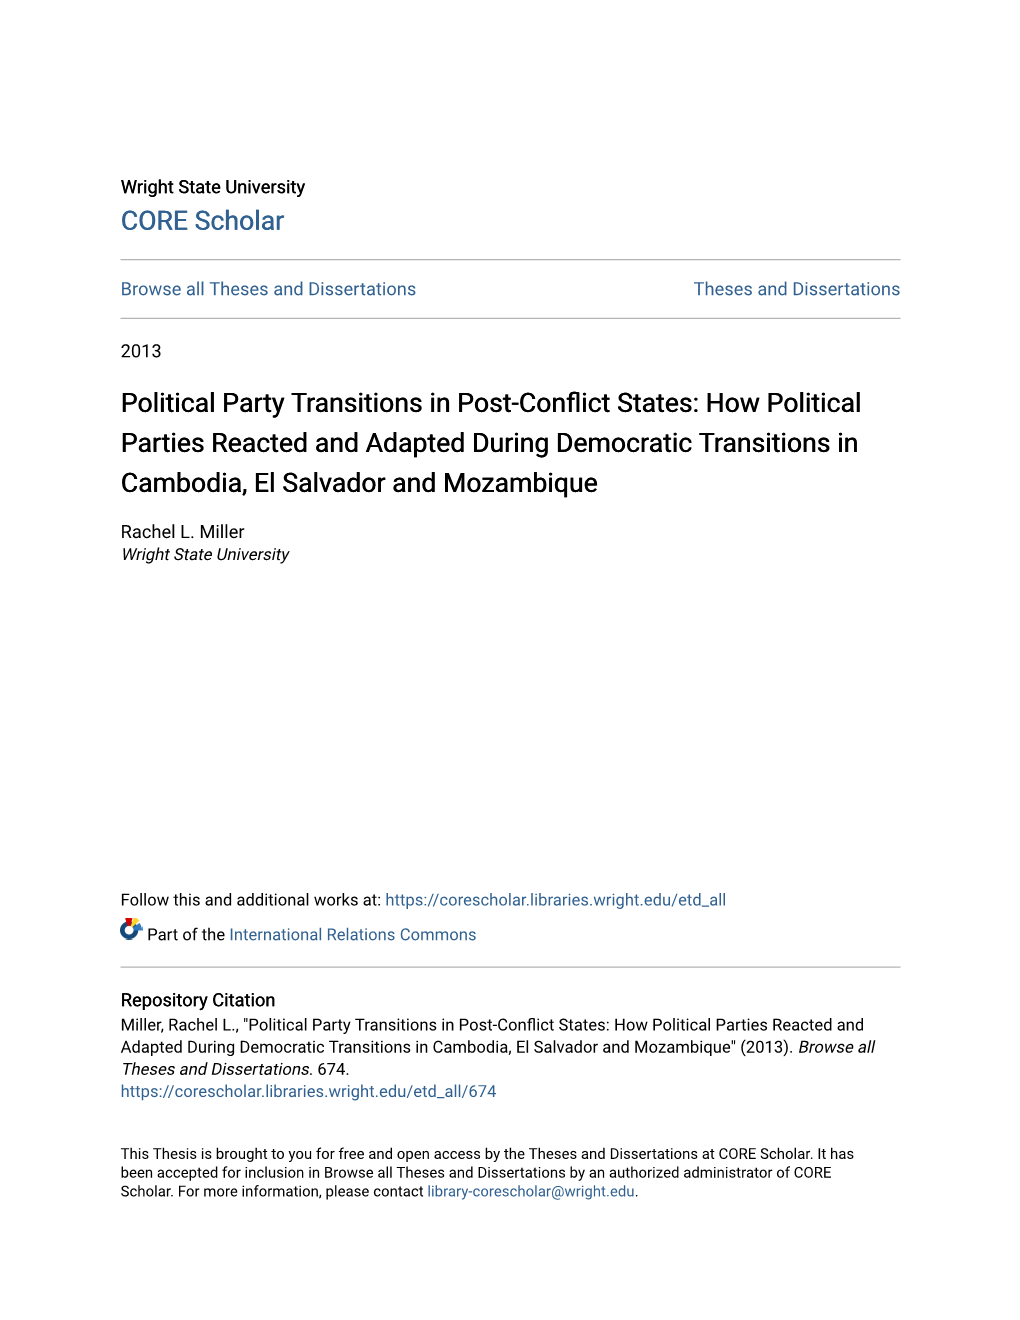 How Political Parties Reacted and Adapted During Democratic Transitions in Cambodia, El Salvador and Mozambique